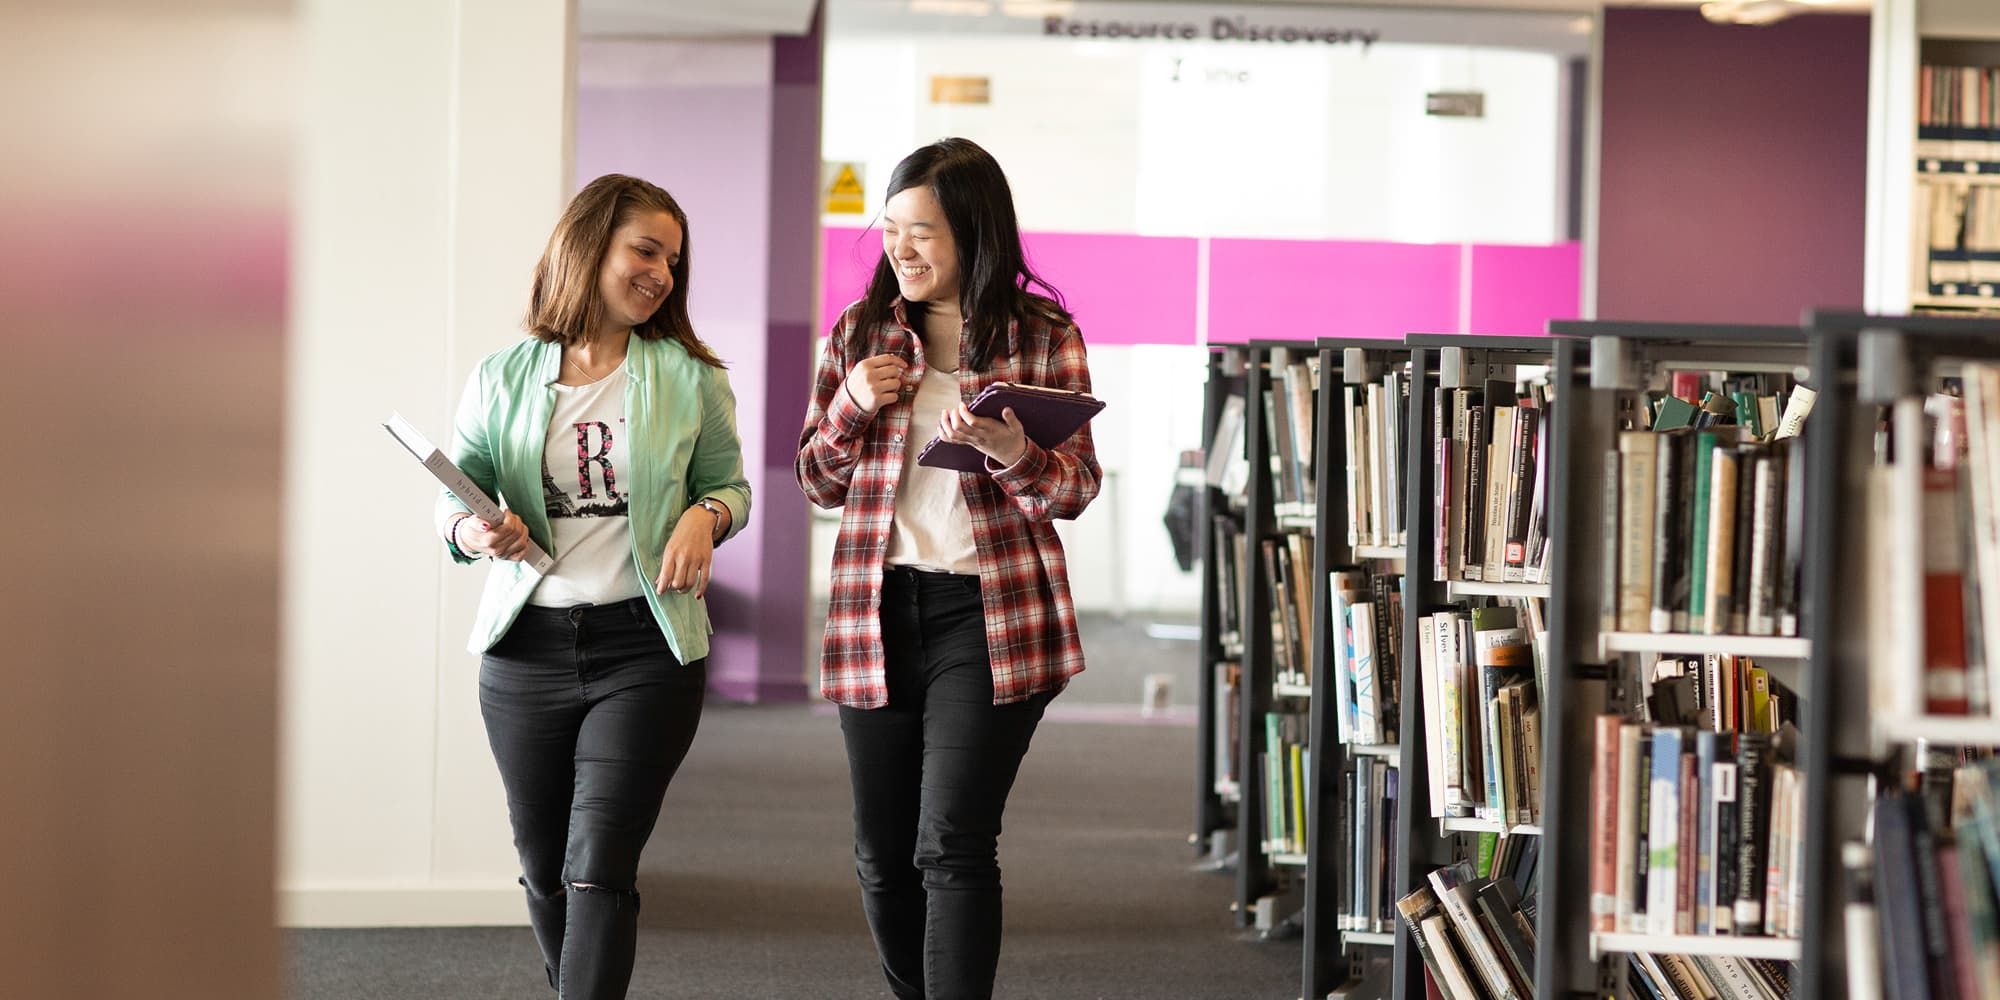 Two students walking through the library with books laughing together